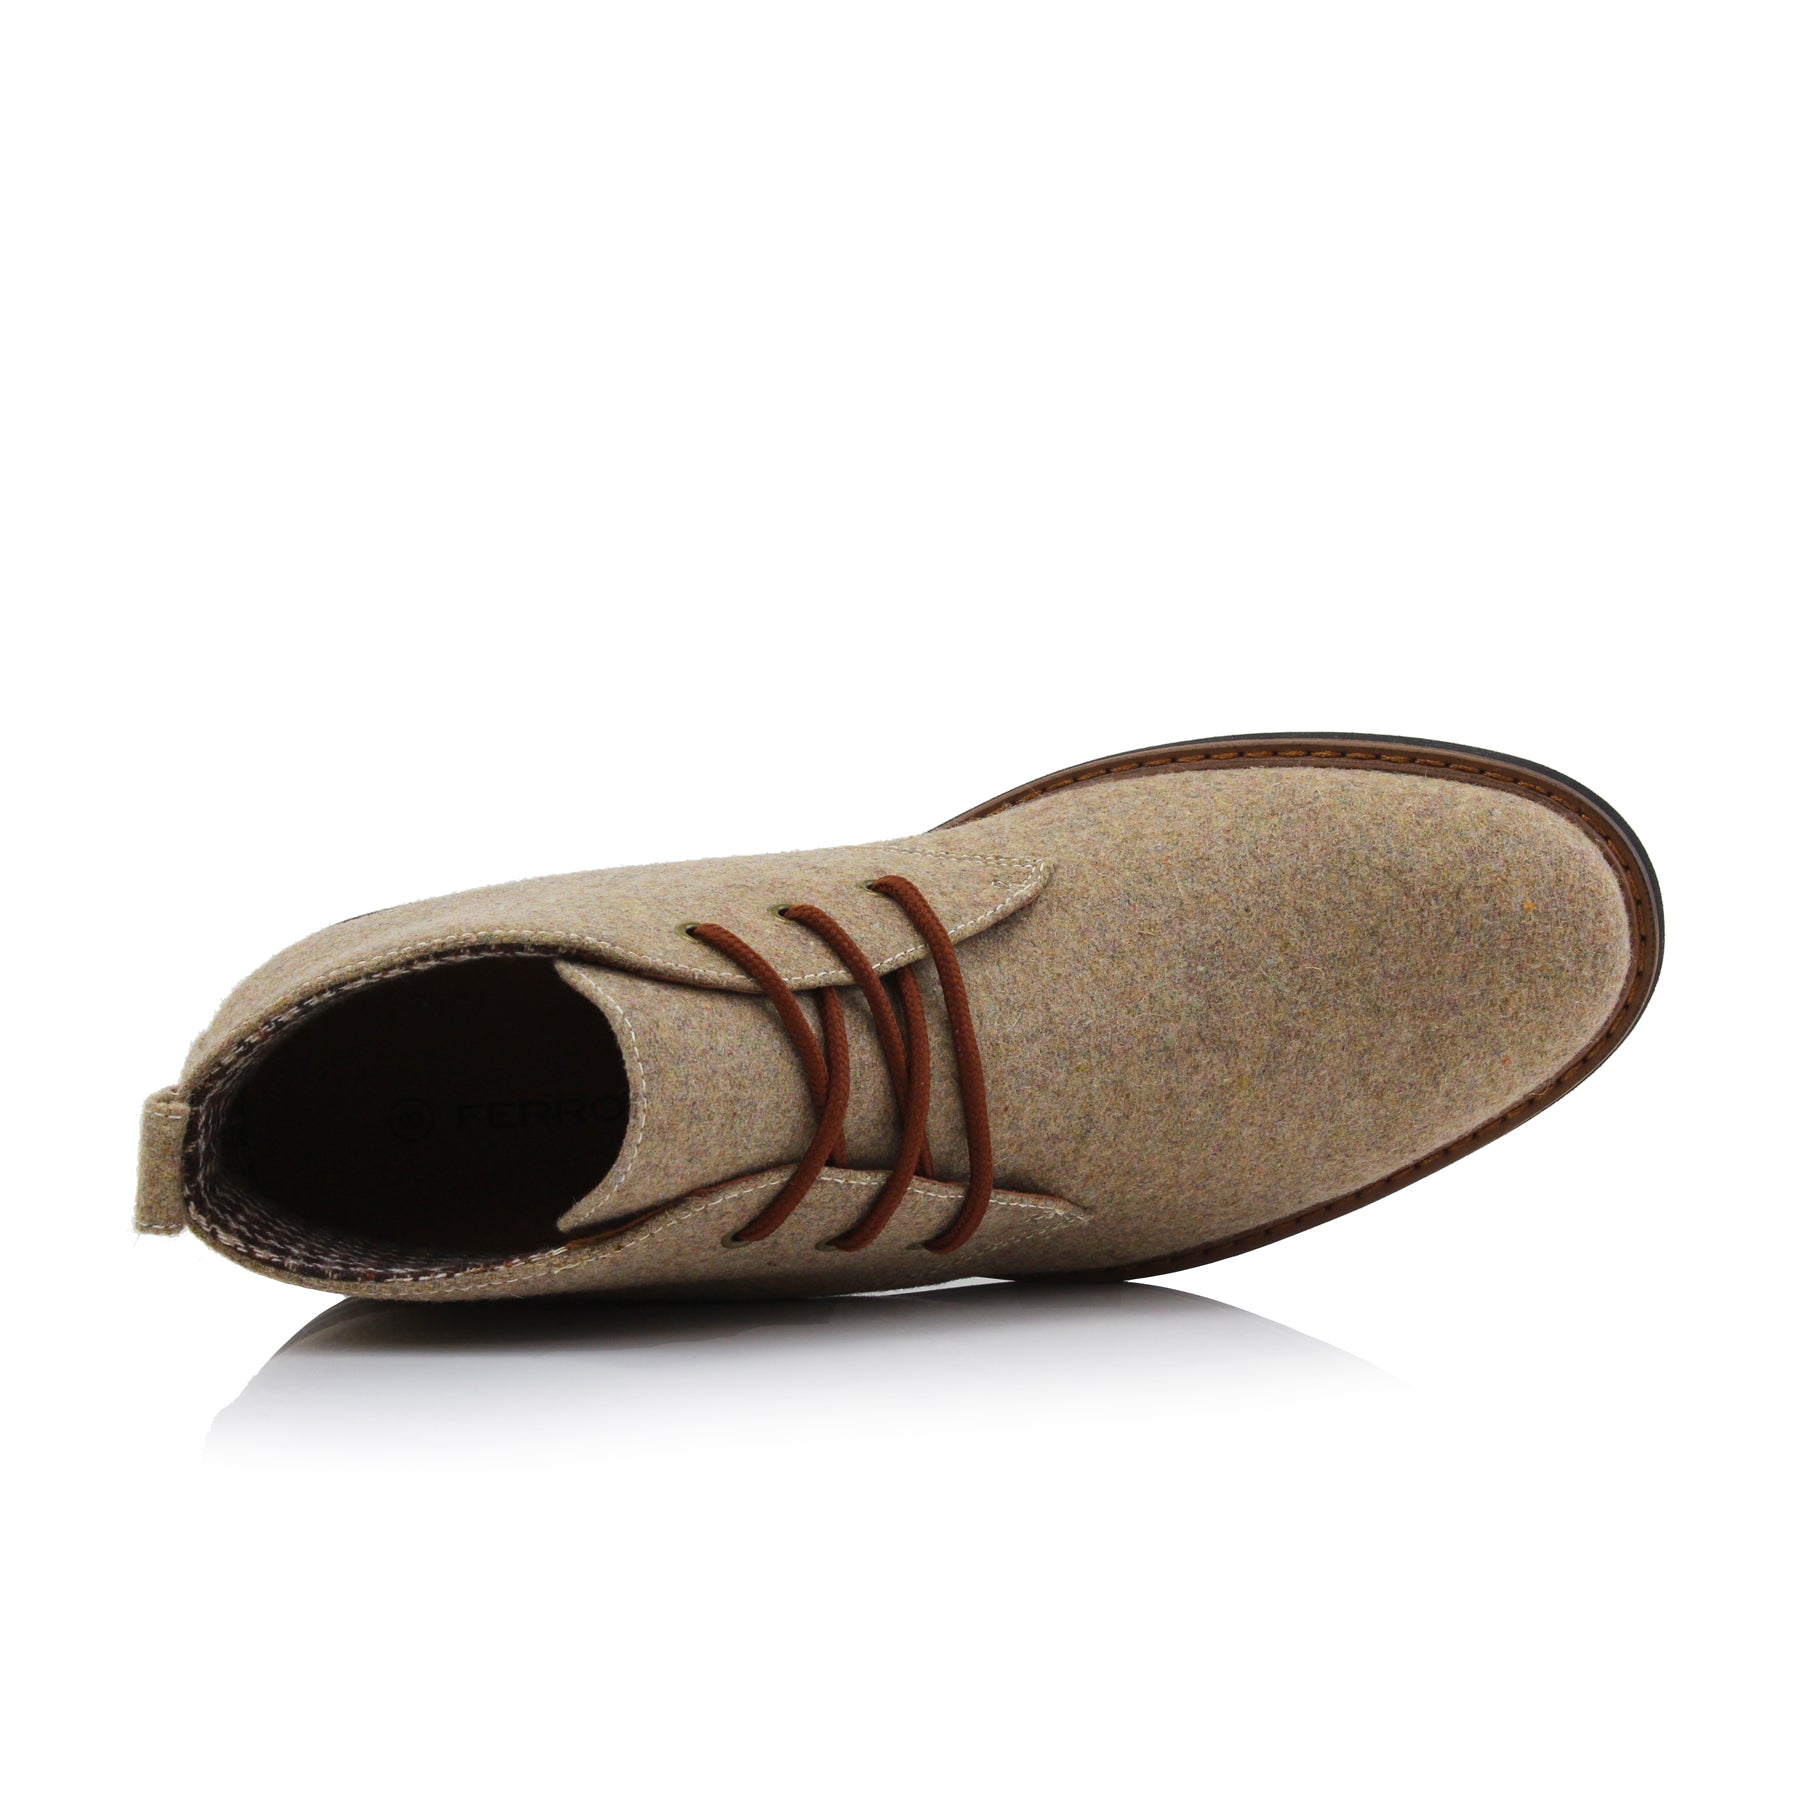 Woolen Chukka Boots | Pablo by Ferro Aldo | Conal Footwear | Top-Down Angle View